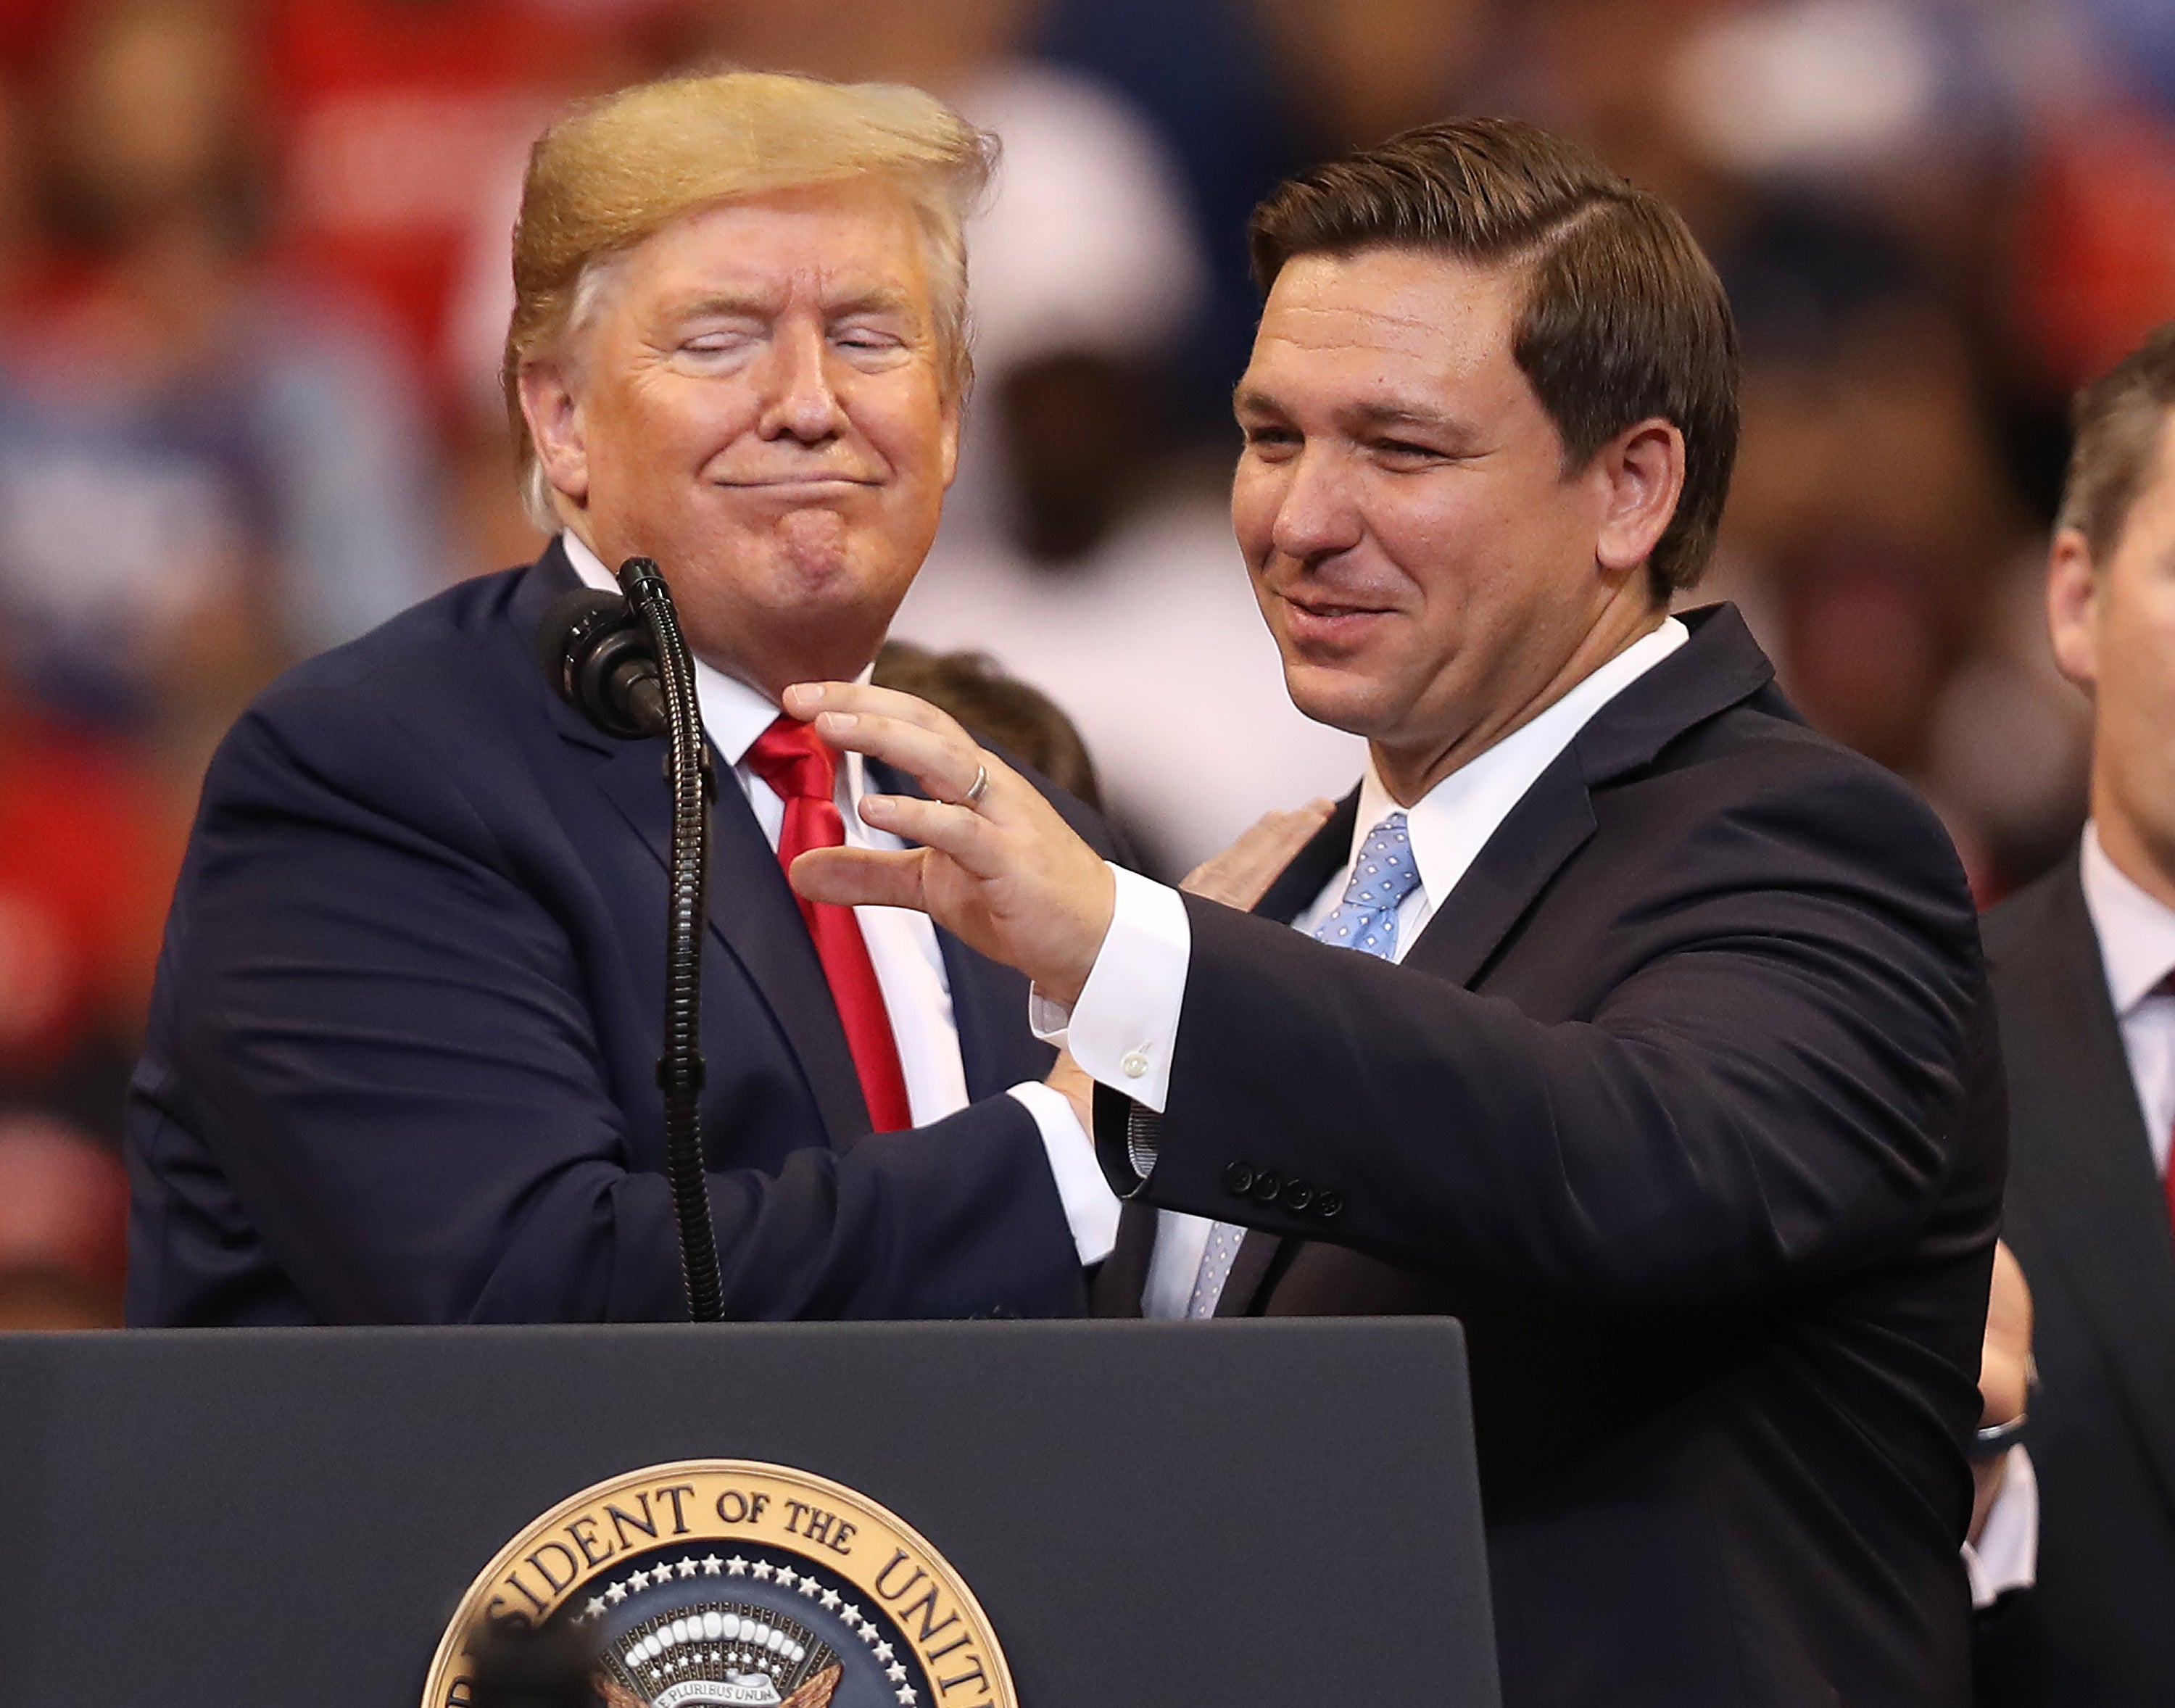 Donald Trump introduces Florida governor Ron DeSantis during a homecoming campaign rally in 2019